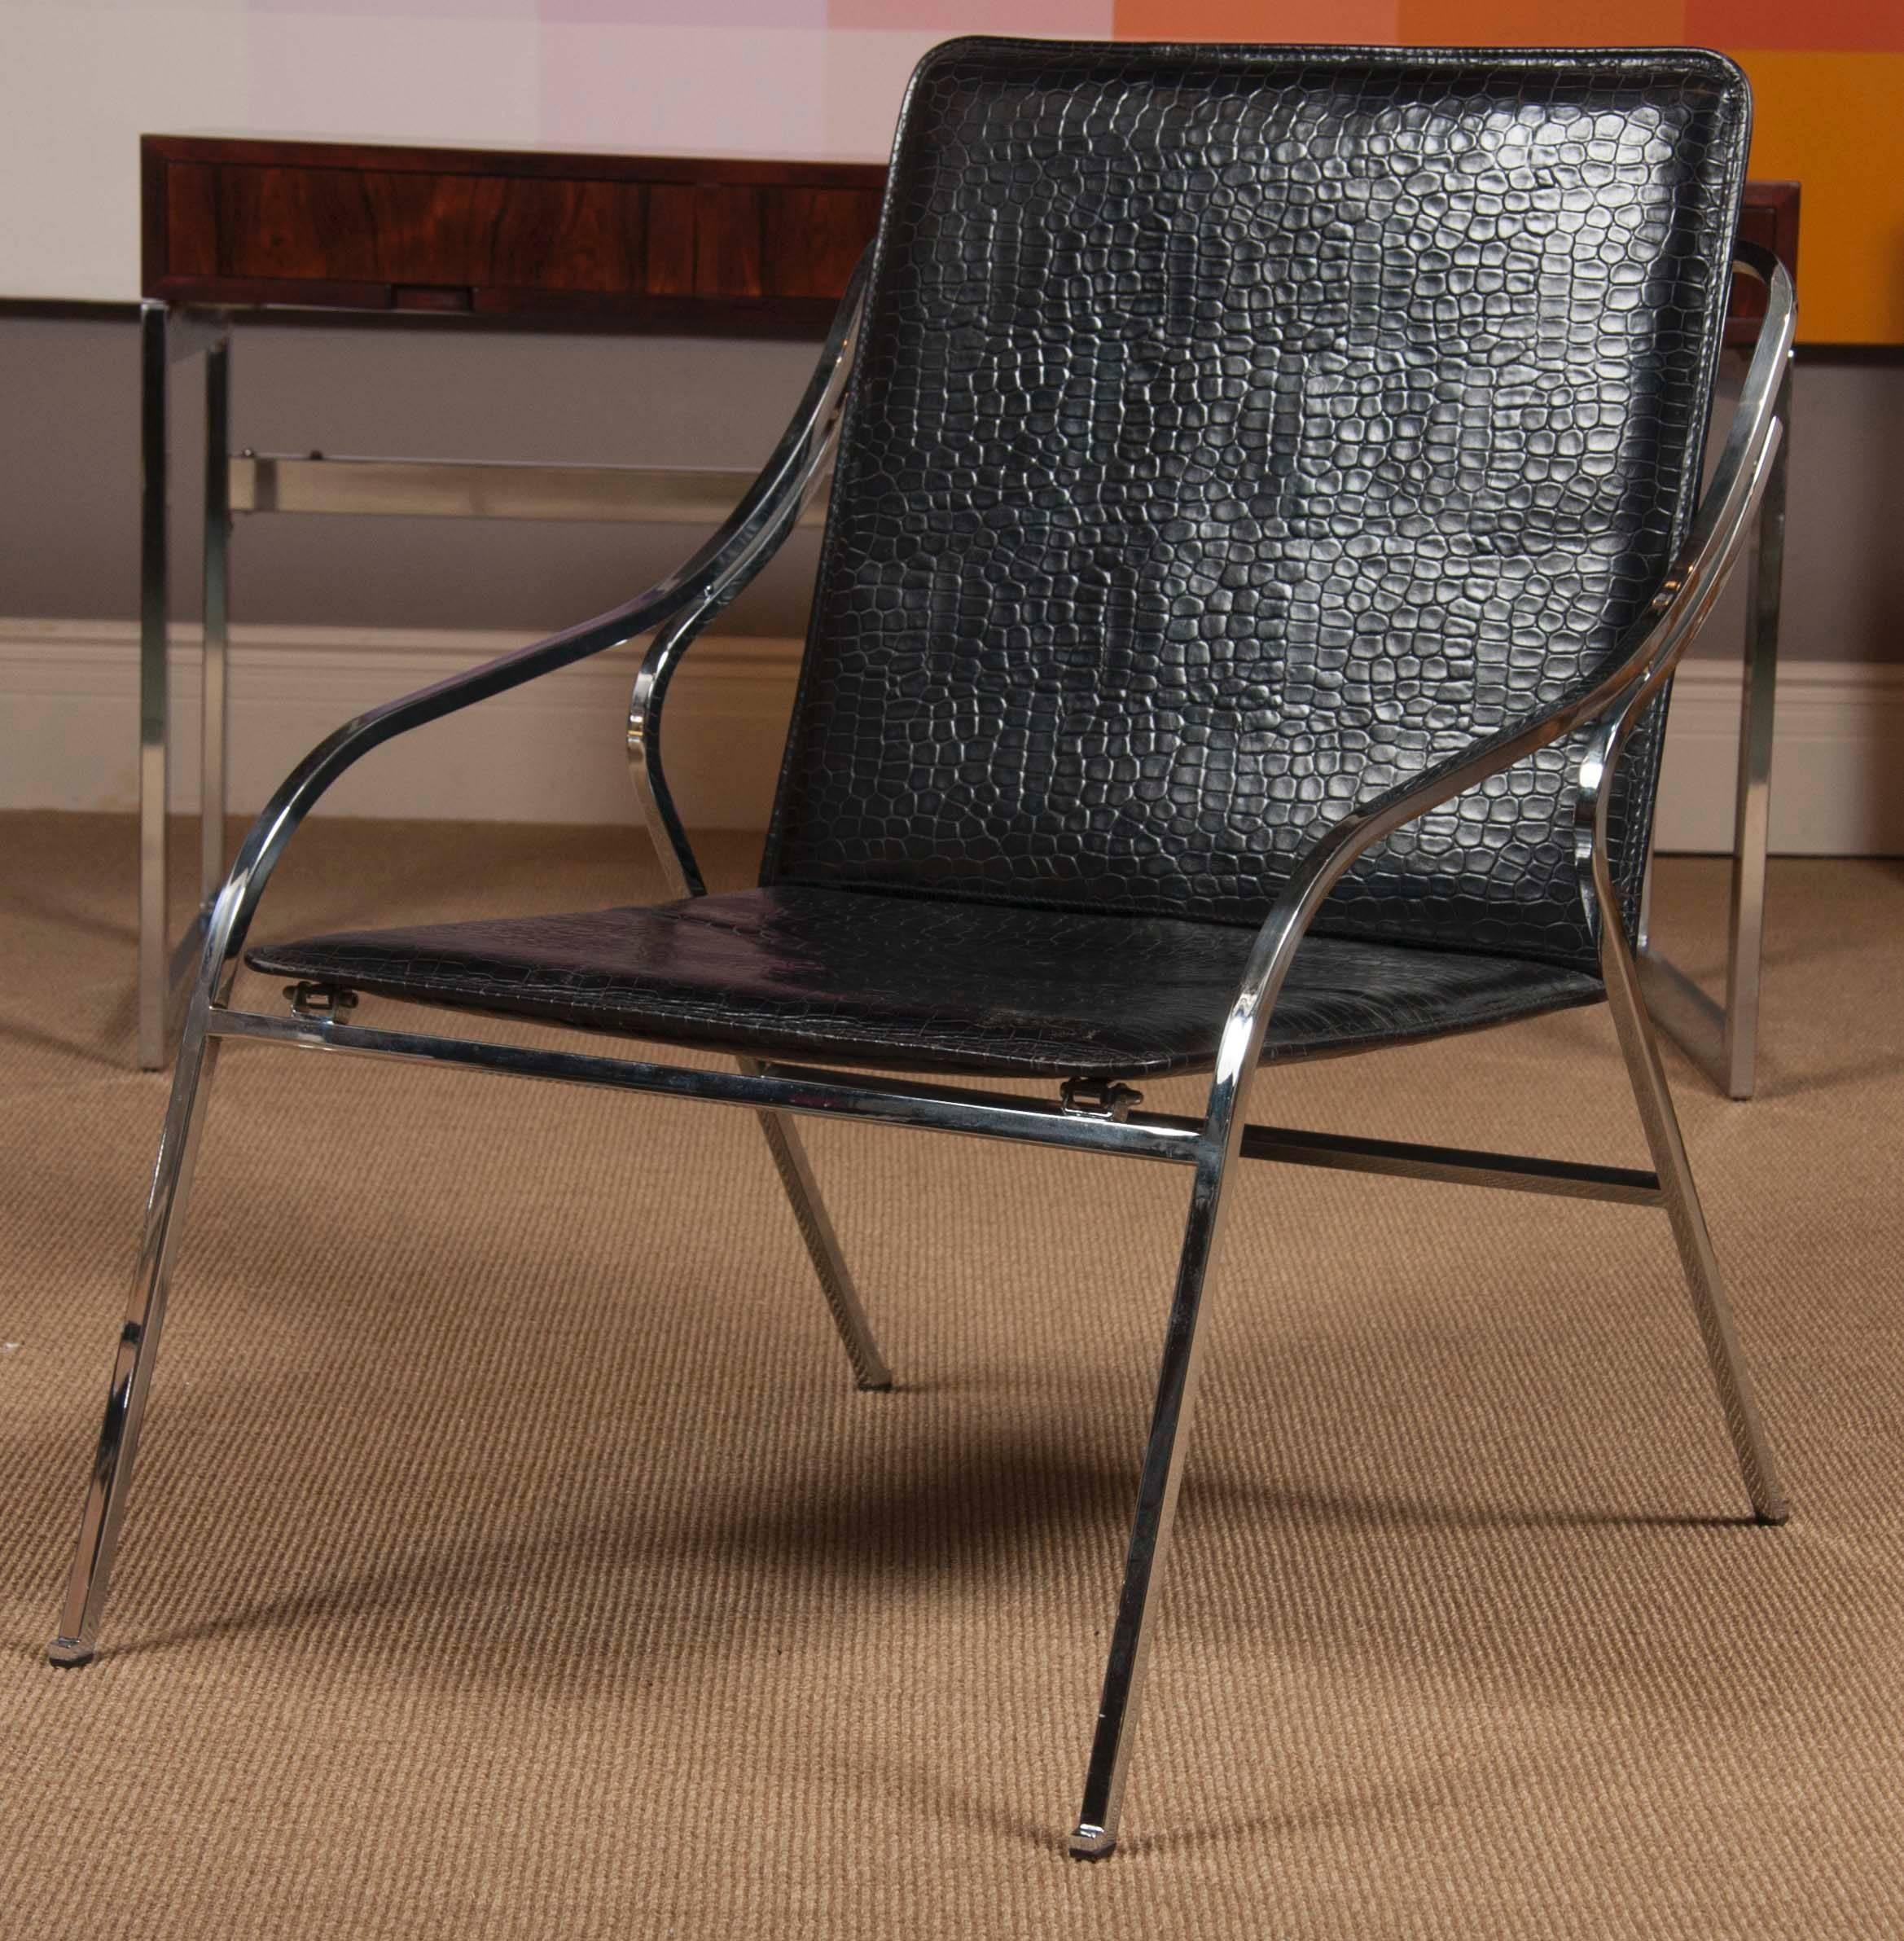 A pair of Italian chrome lounge chairs with faux alligator leather upholstery. Showing influences of Danish designer, Poul Kjaerholm.